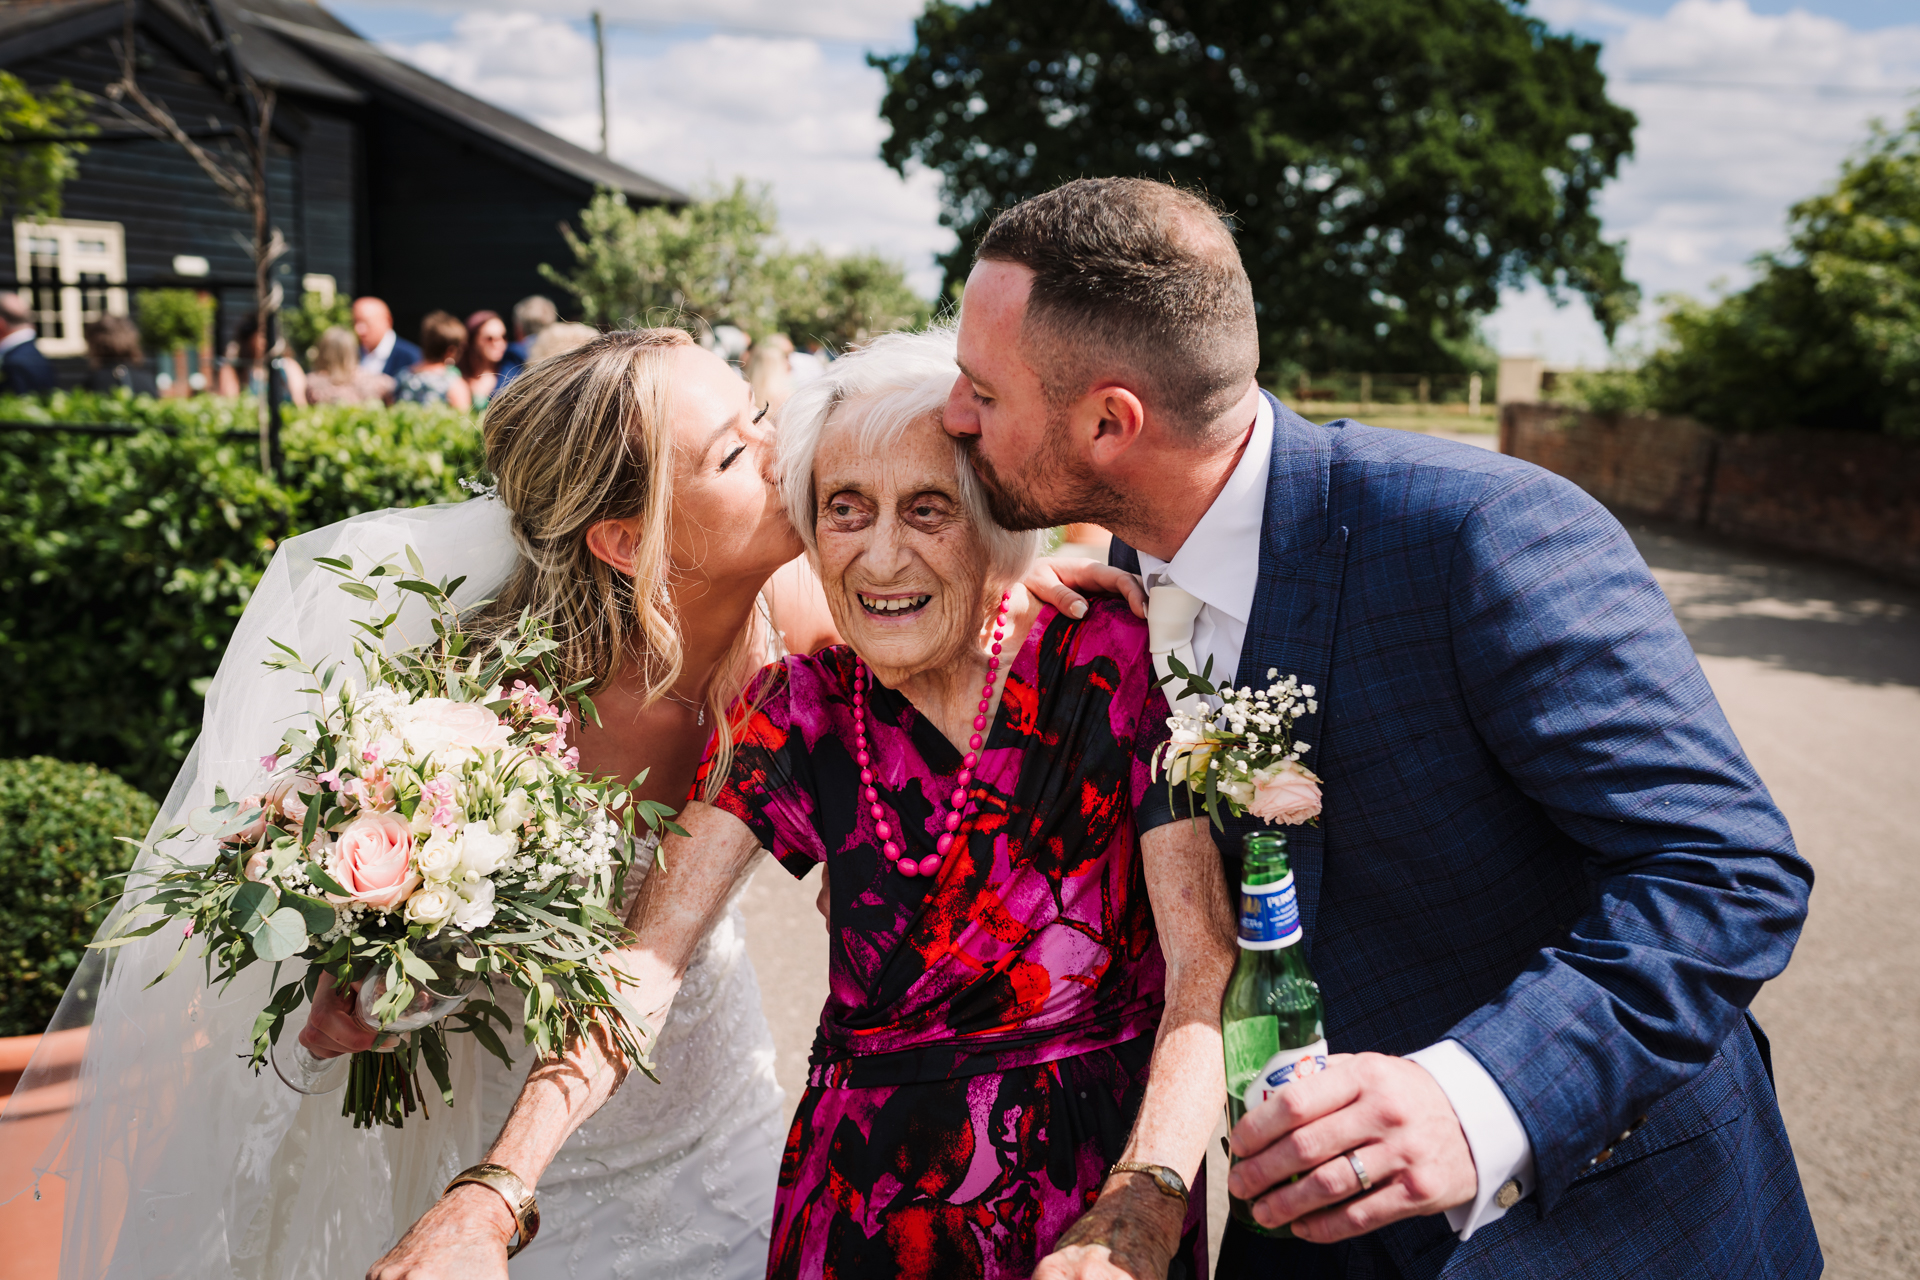 Bride and groom kiss the grooms grandmother on both cheeks as she leaves the Milling Barn wedding reception